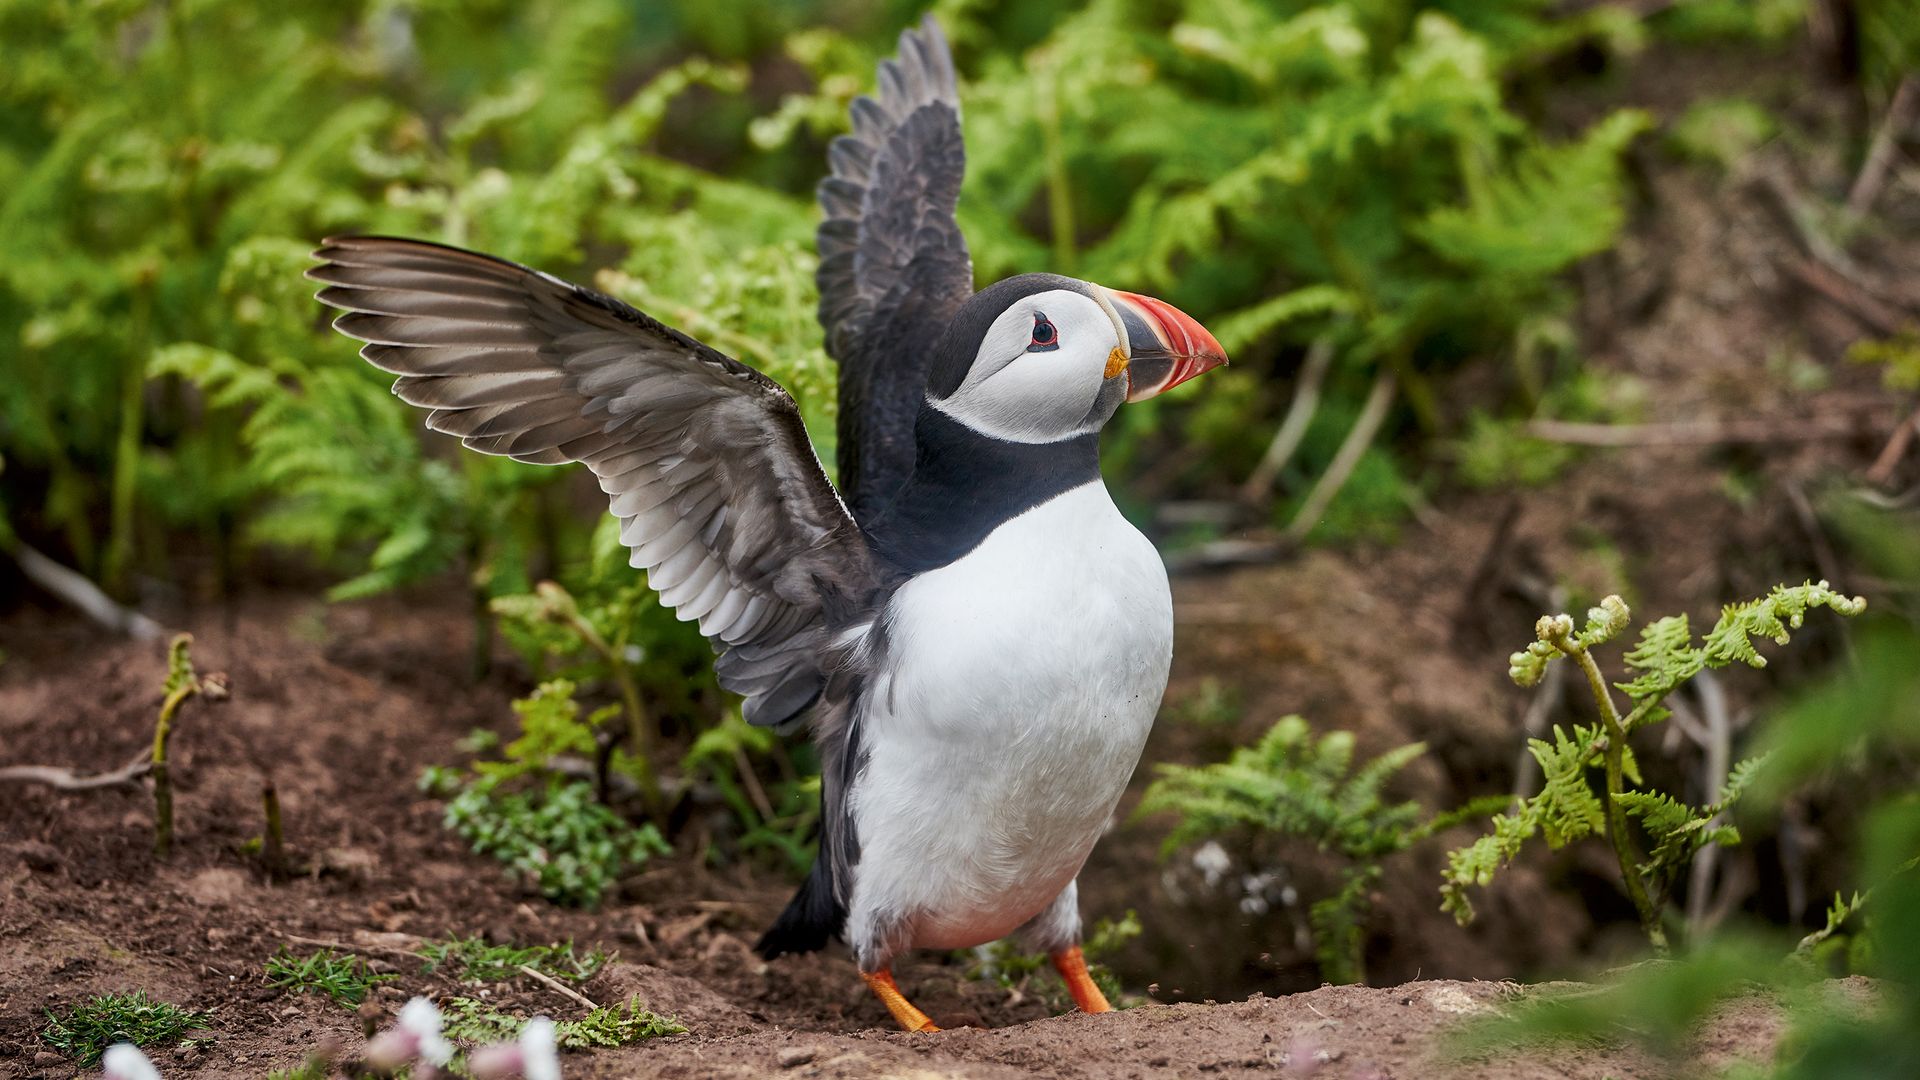 An Atlantic puffin (Fratercula arctica) on the island of Skomer, off the coast of Wales, taken on September 13, 2016